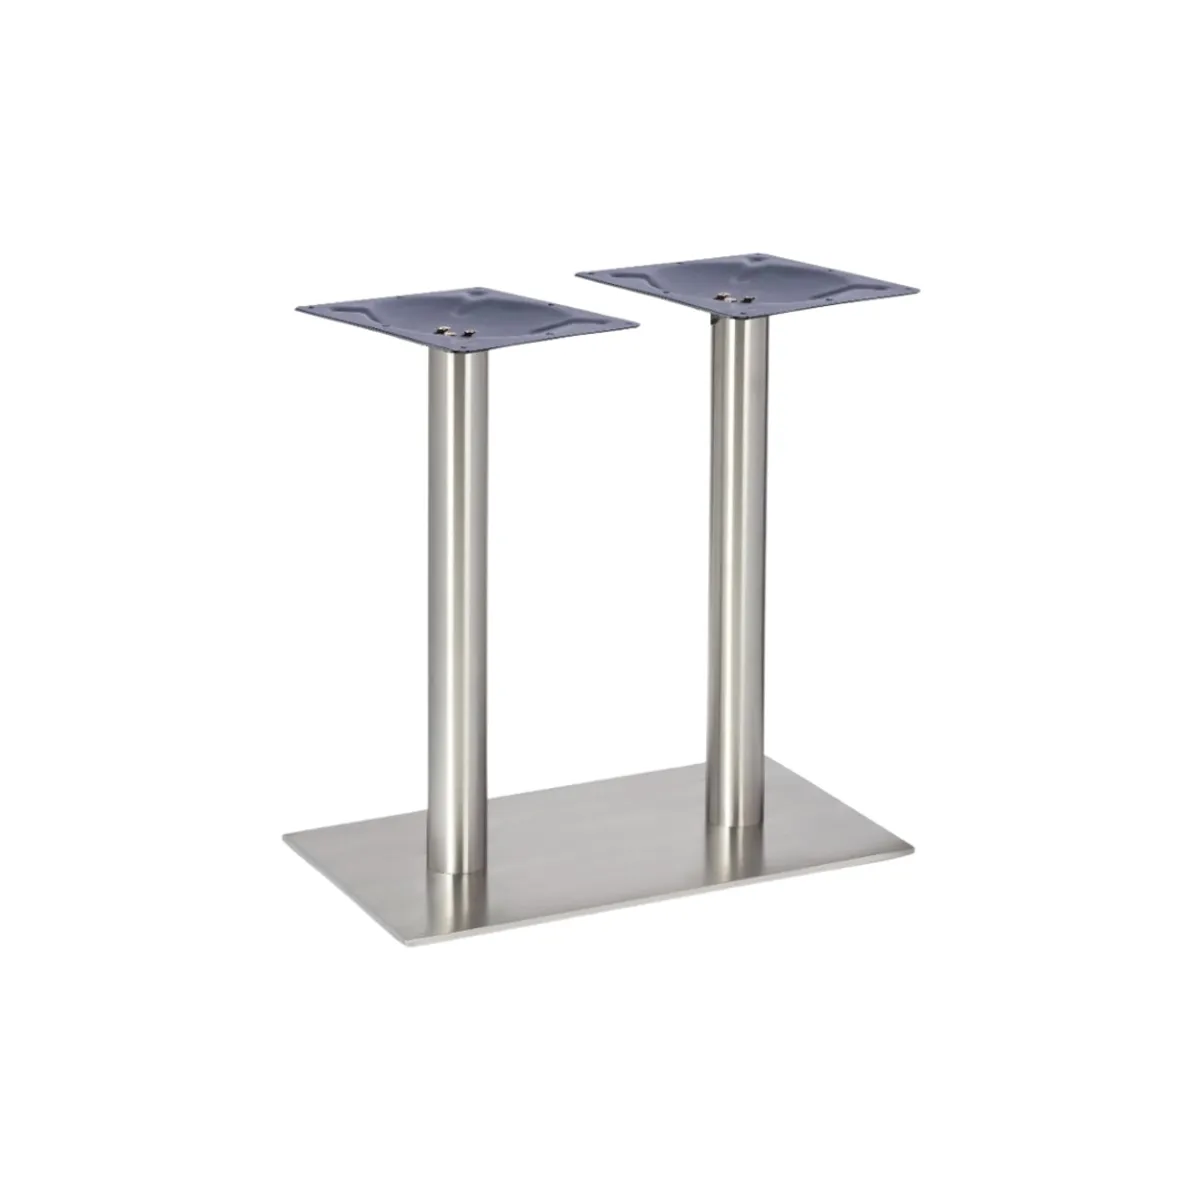 Flat twin rectangular table base with round columns 1